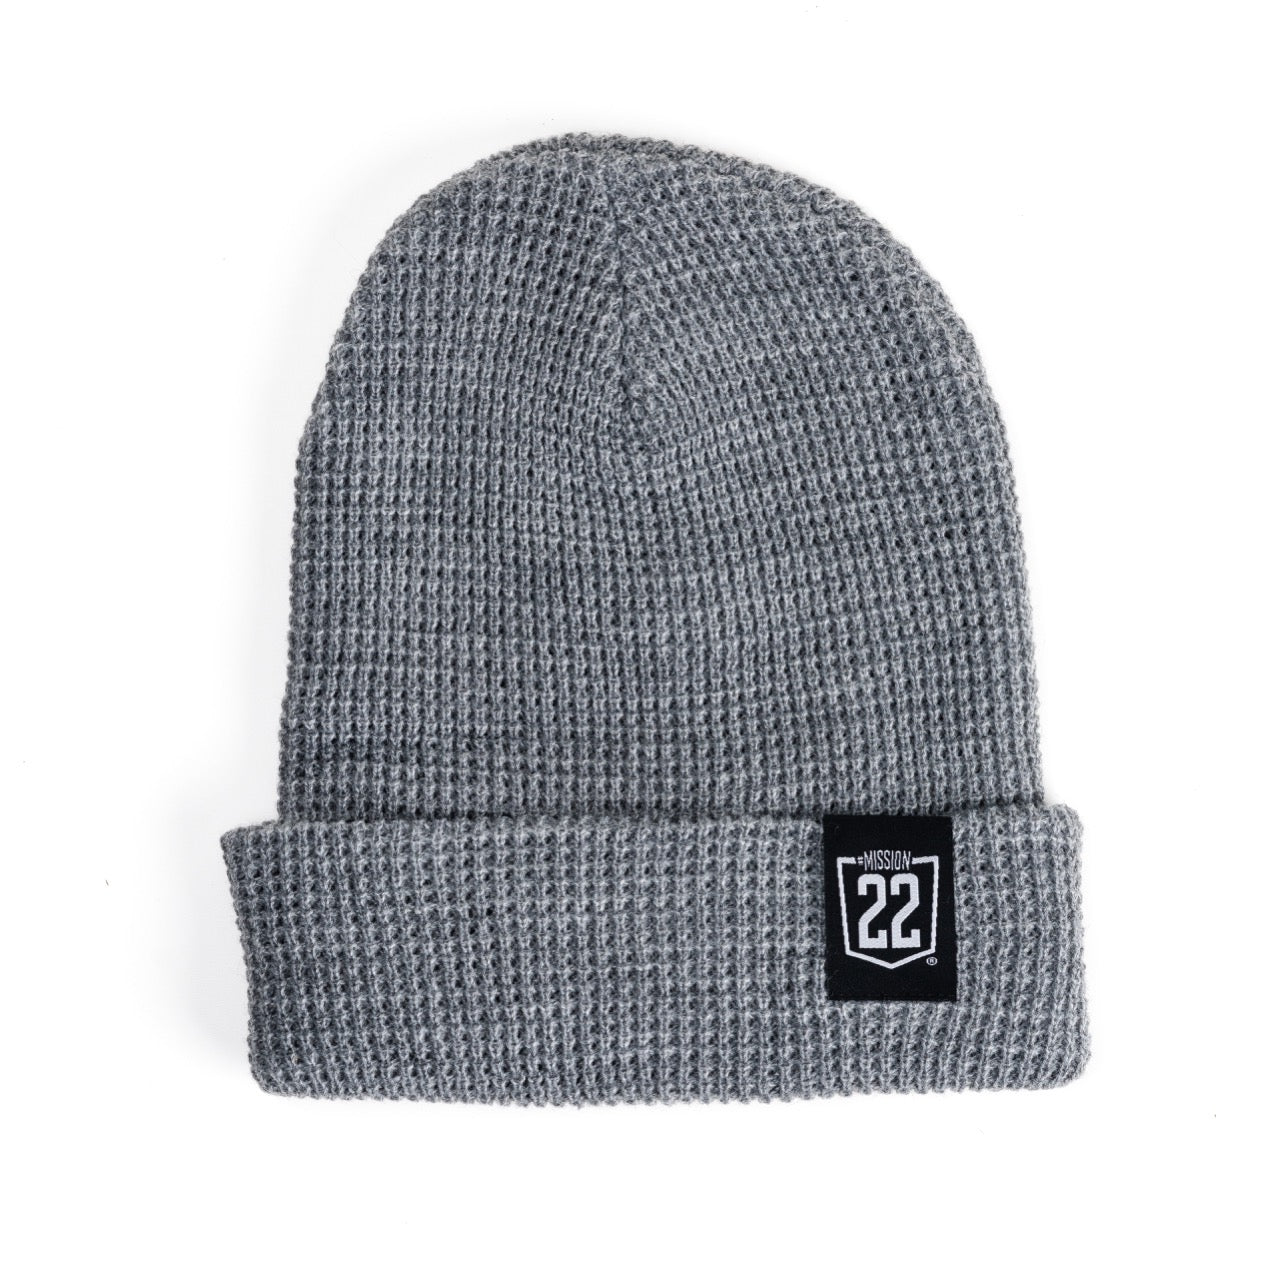 Product Image of Knit Cap #6